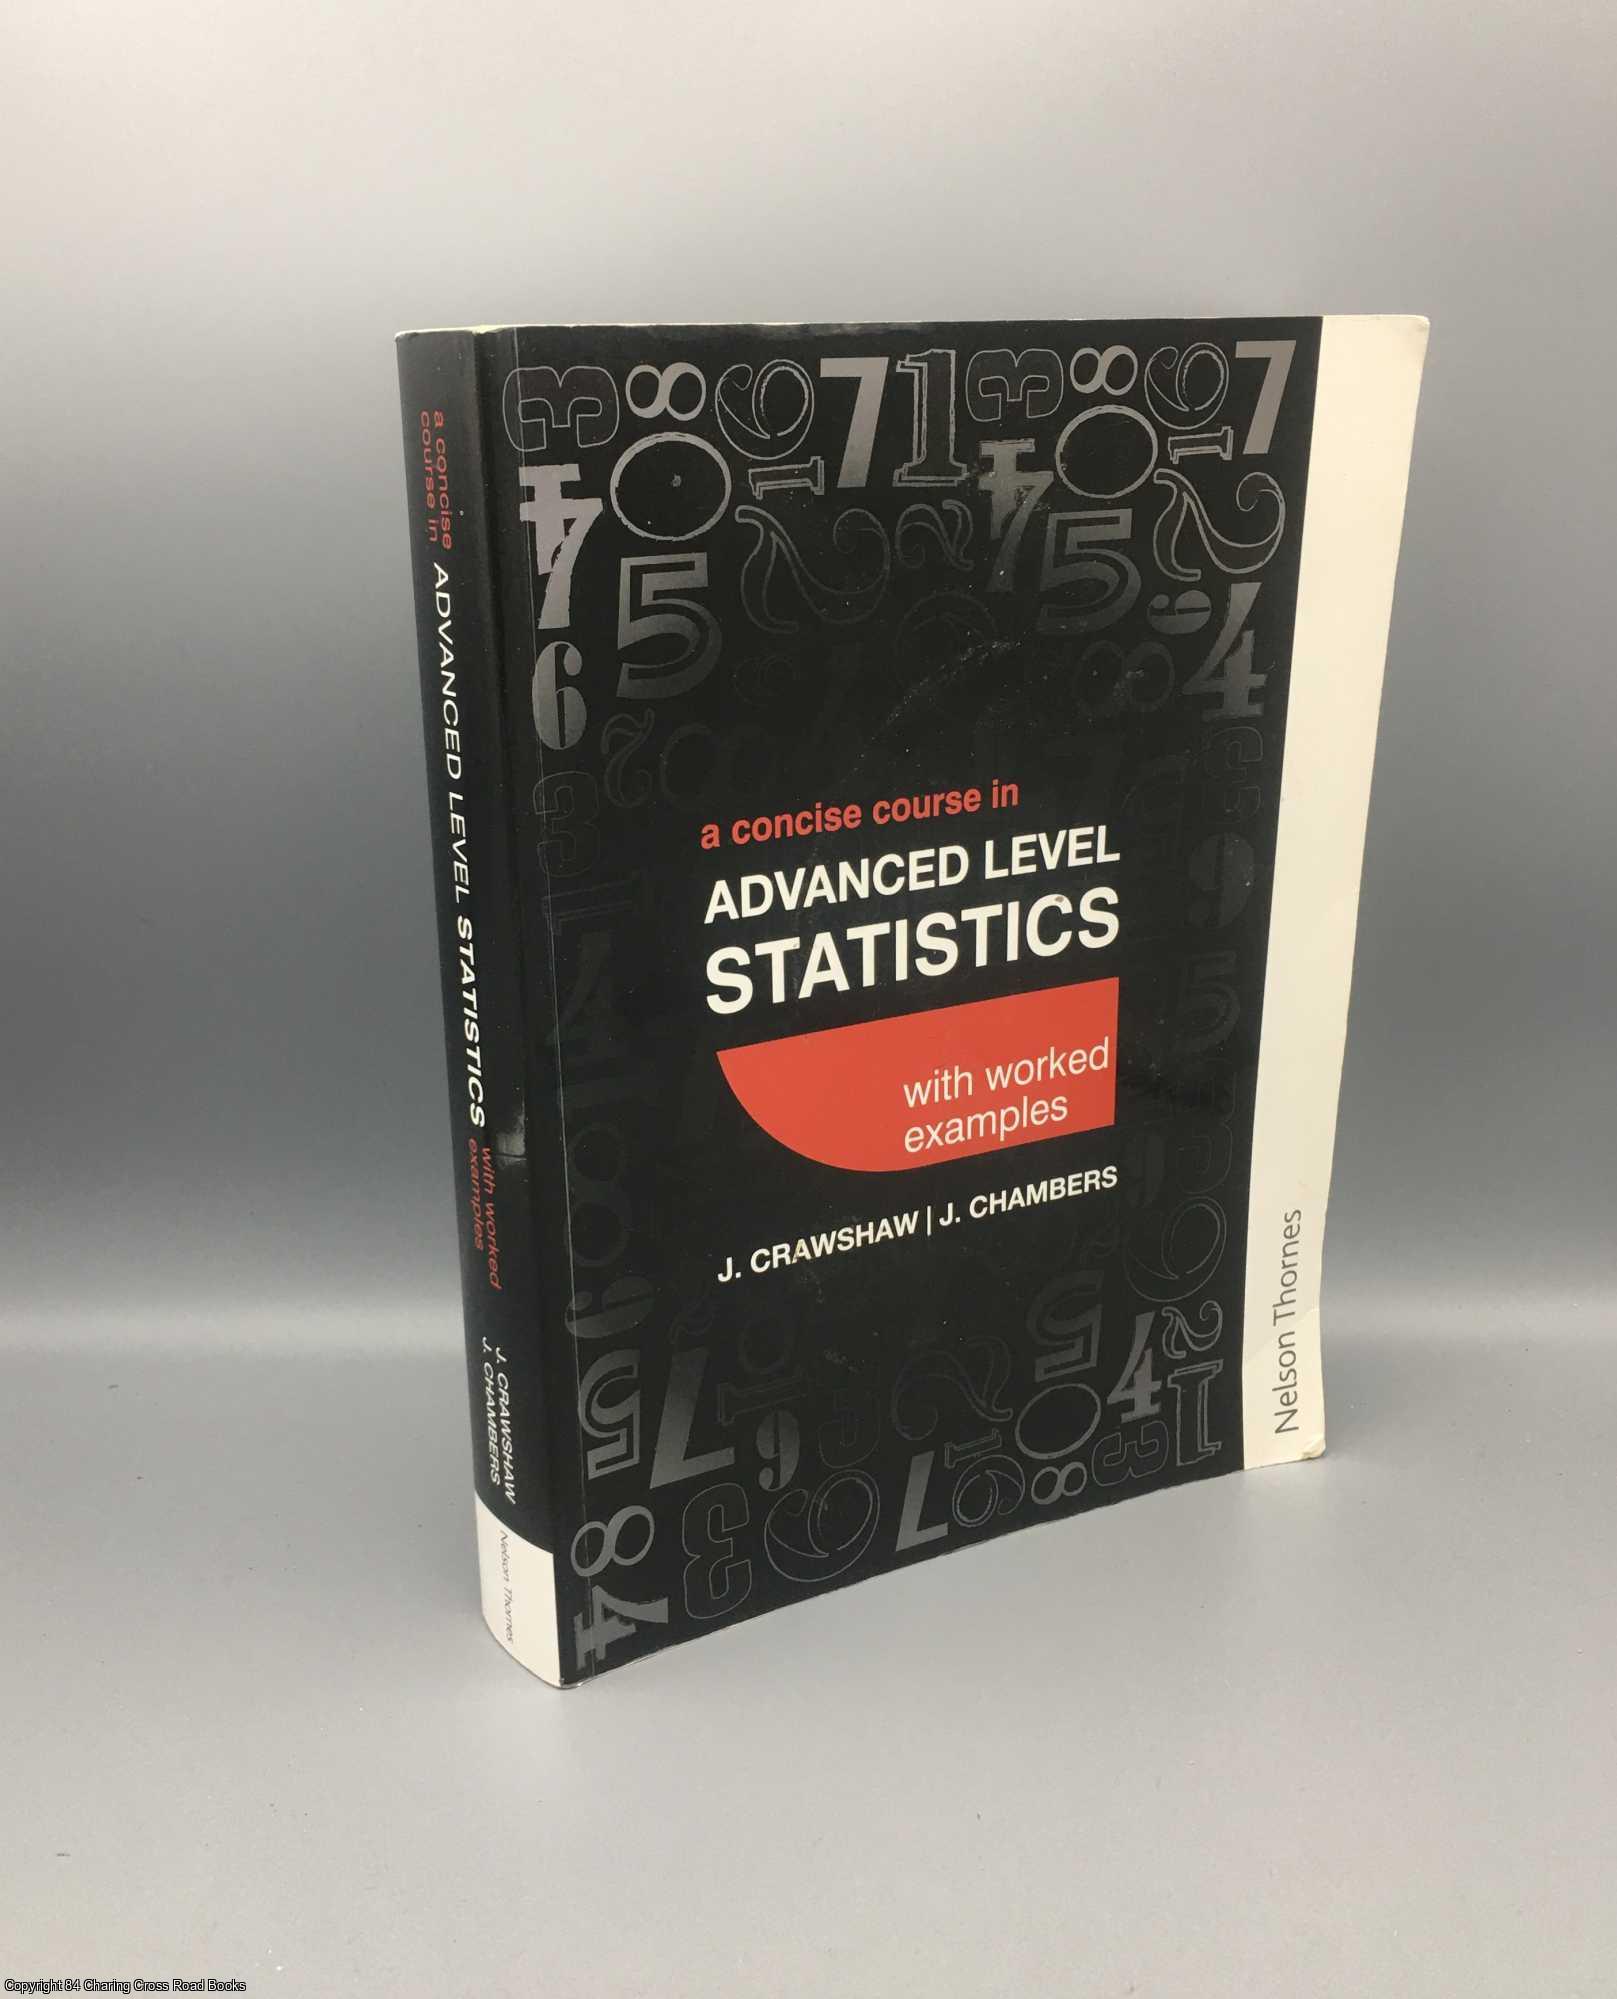 Crawshaw; Chambers - A Concise Course in Advanced Level Statistics